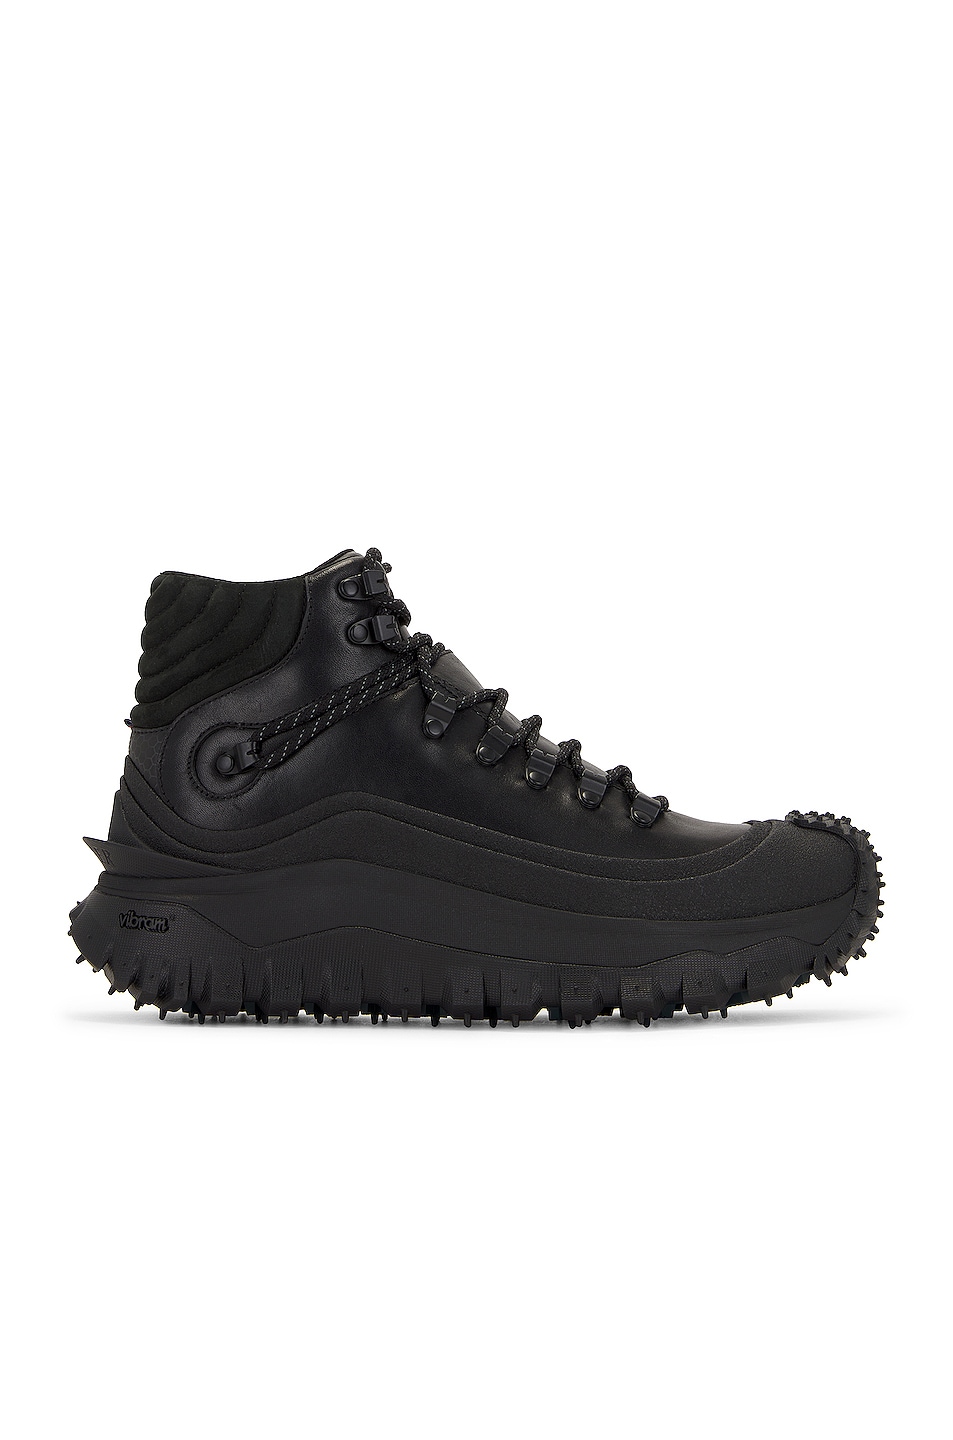 Image 1 of Moncler Trailgrip High GTX High Top Sneakers in Black